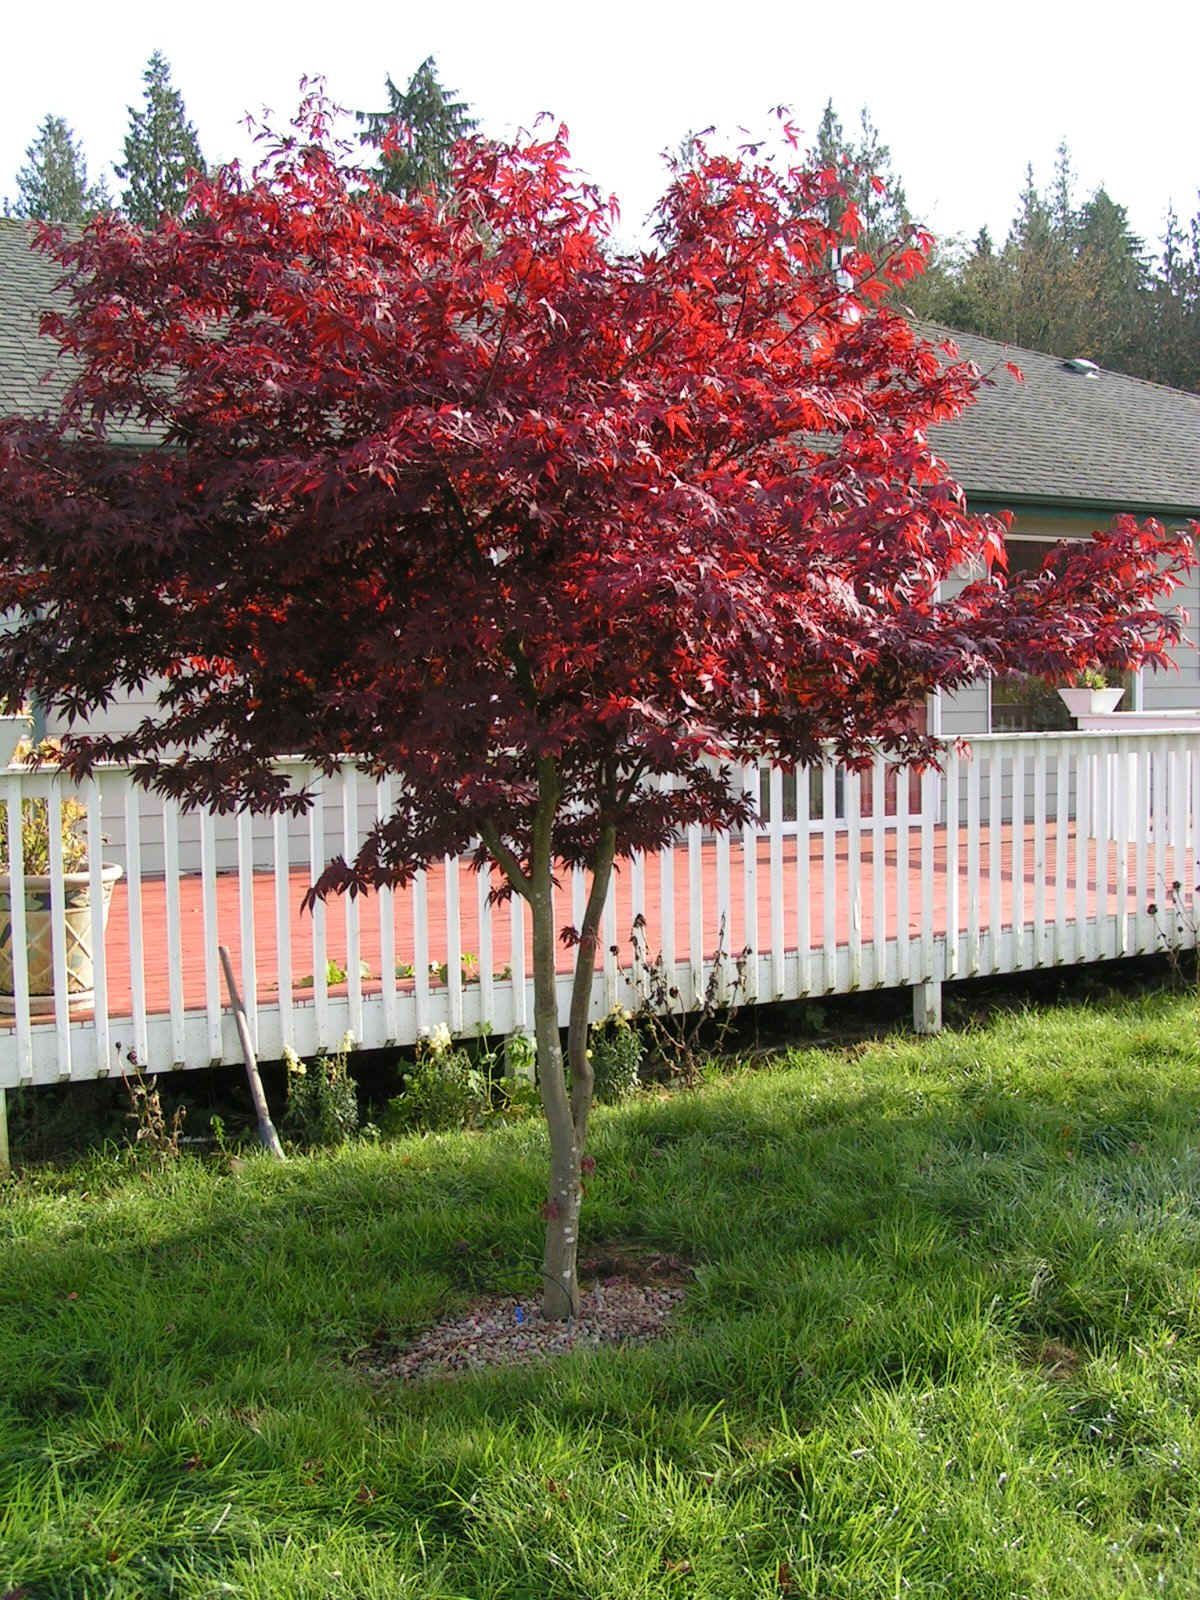 Red maple tree in a backyard full of grass and deck behind it